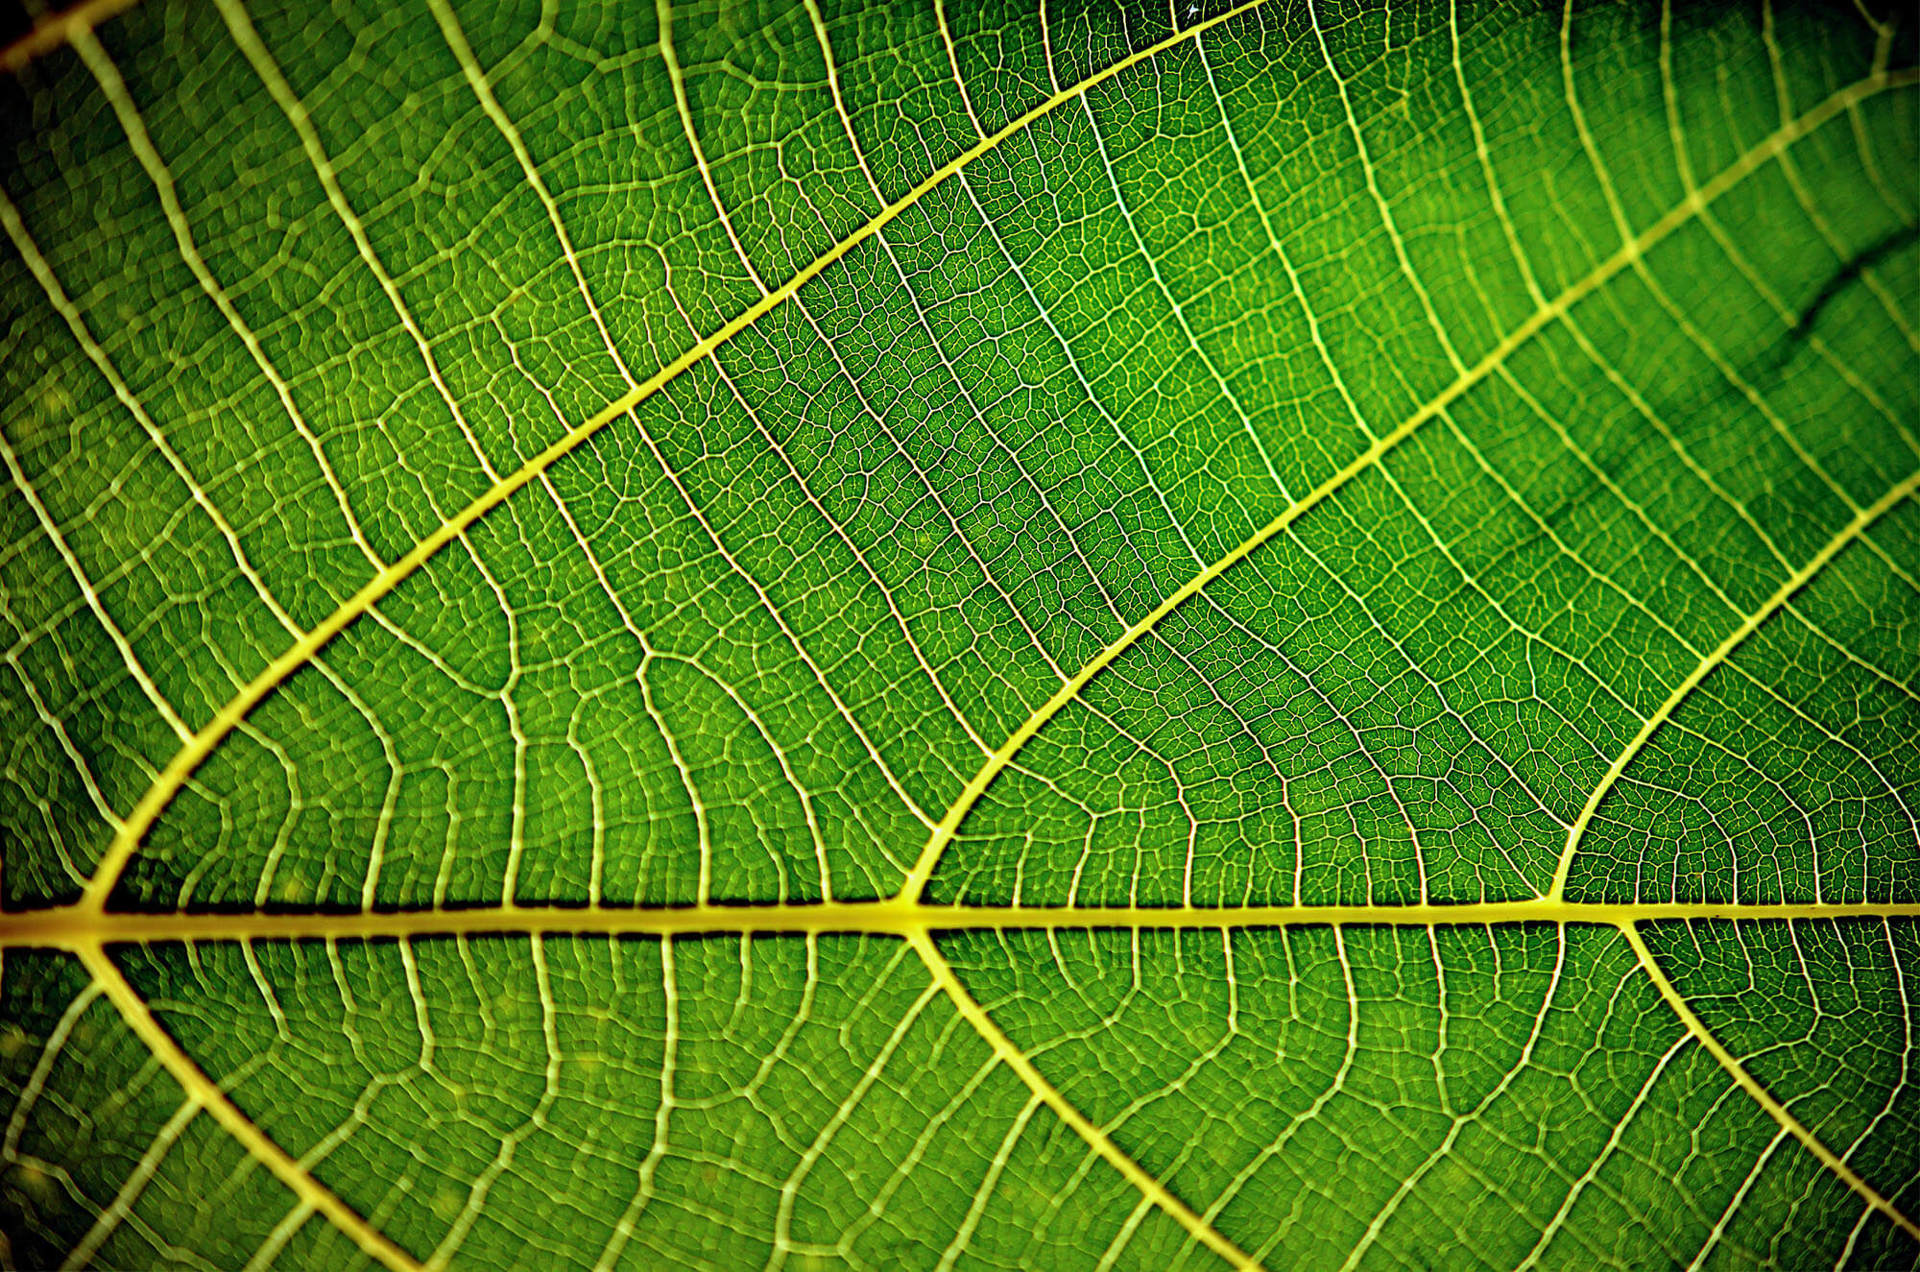 The underside of a green leaf